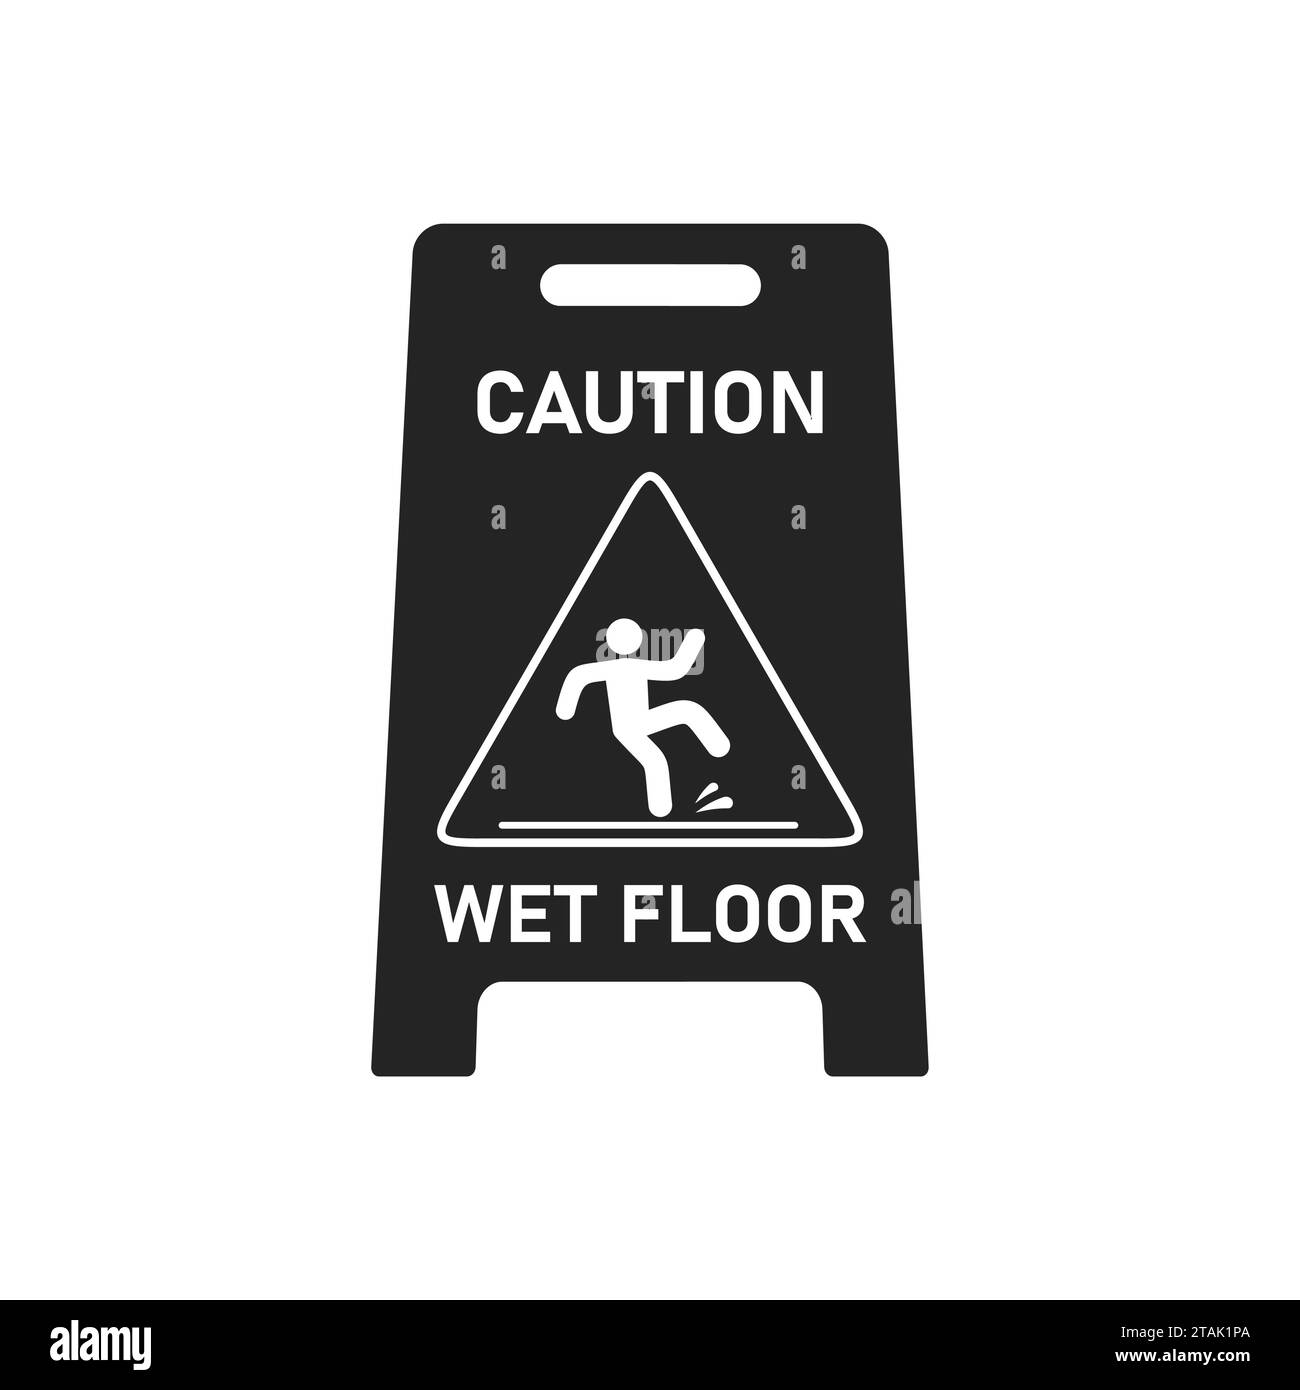 Black wet floor caution sign isolated on white background, Public warning symbol clipart. Slippery surface beware plastic board design element. Stock Vector